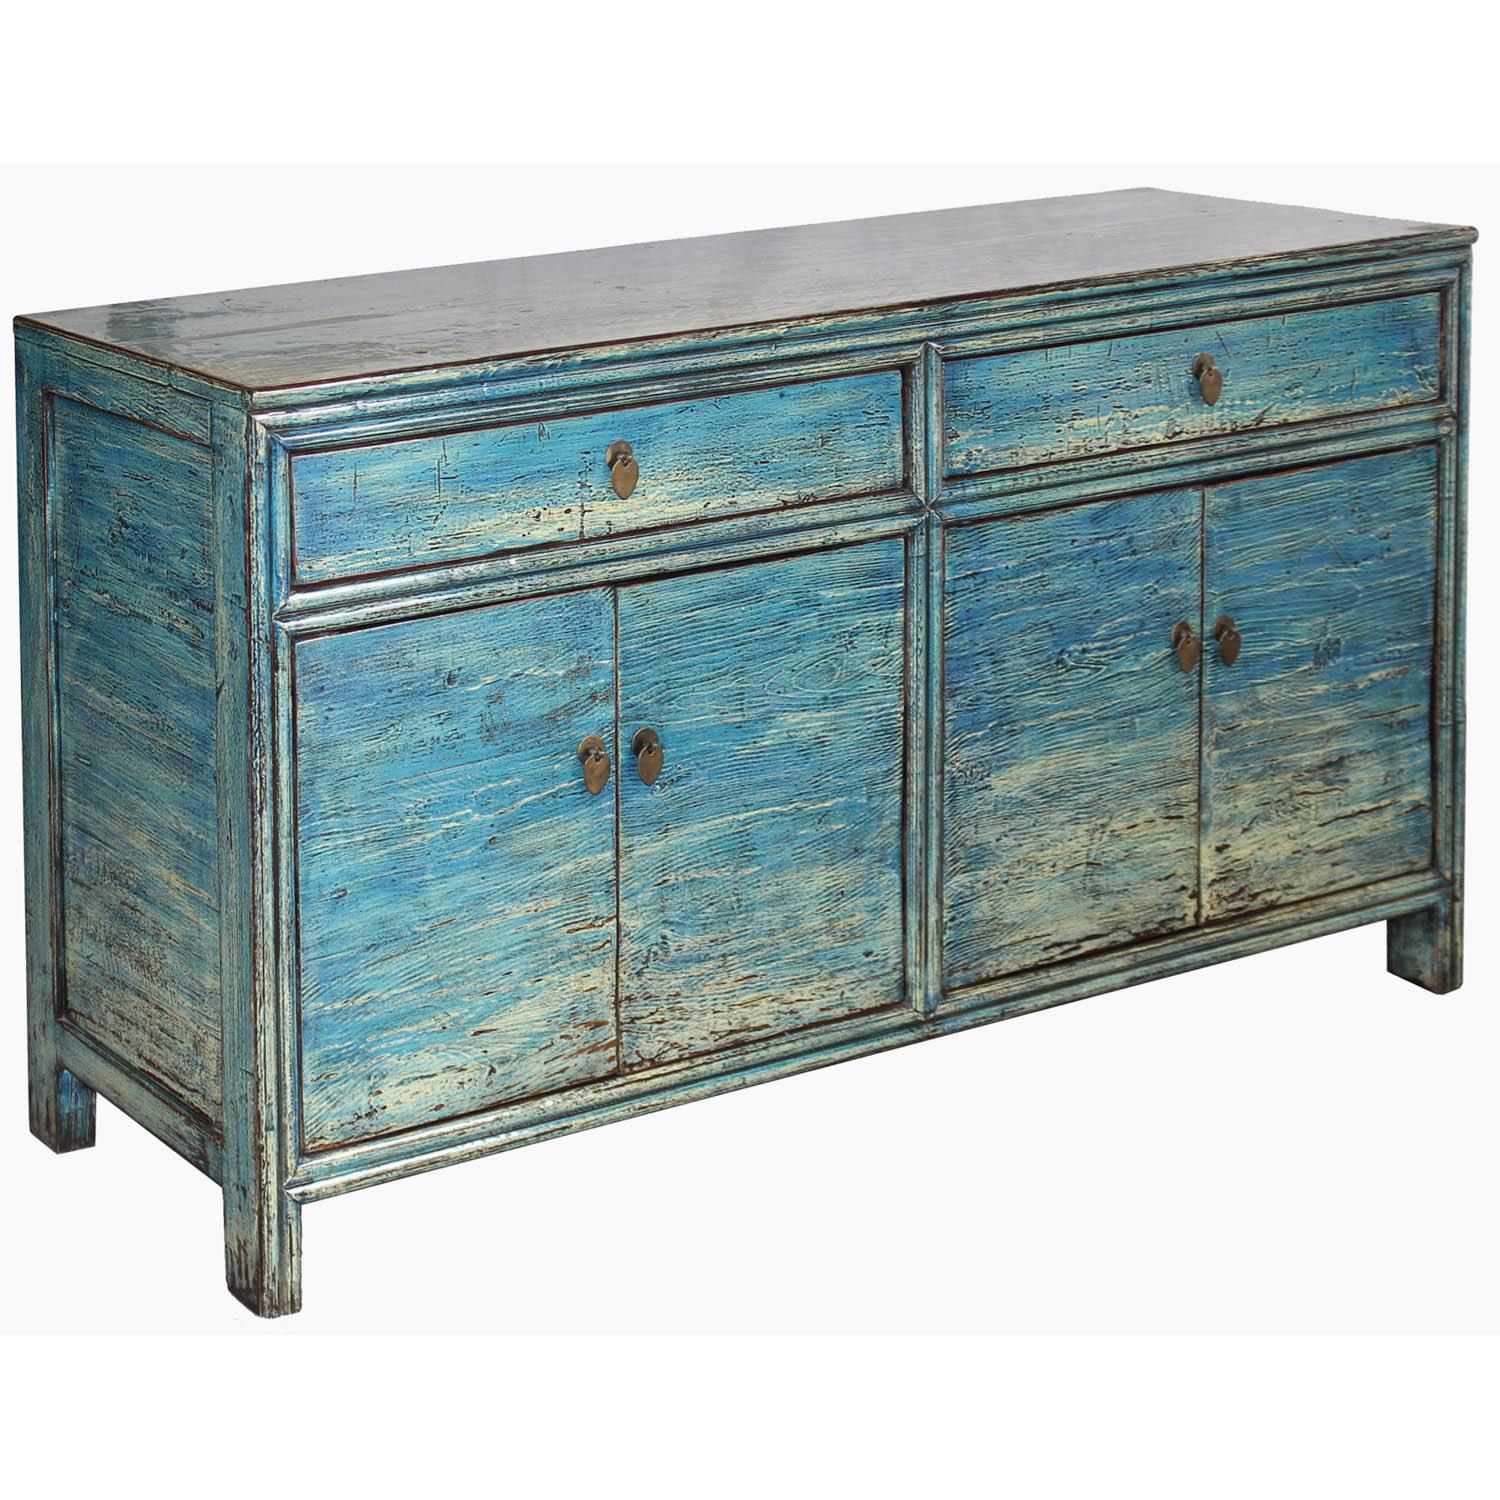 Contemporary four-door sideboard with soft blue and white marbled finished and rounded edges.